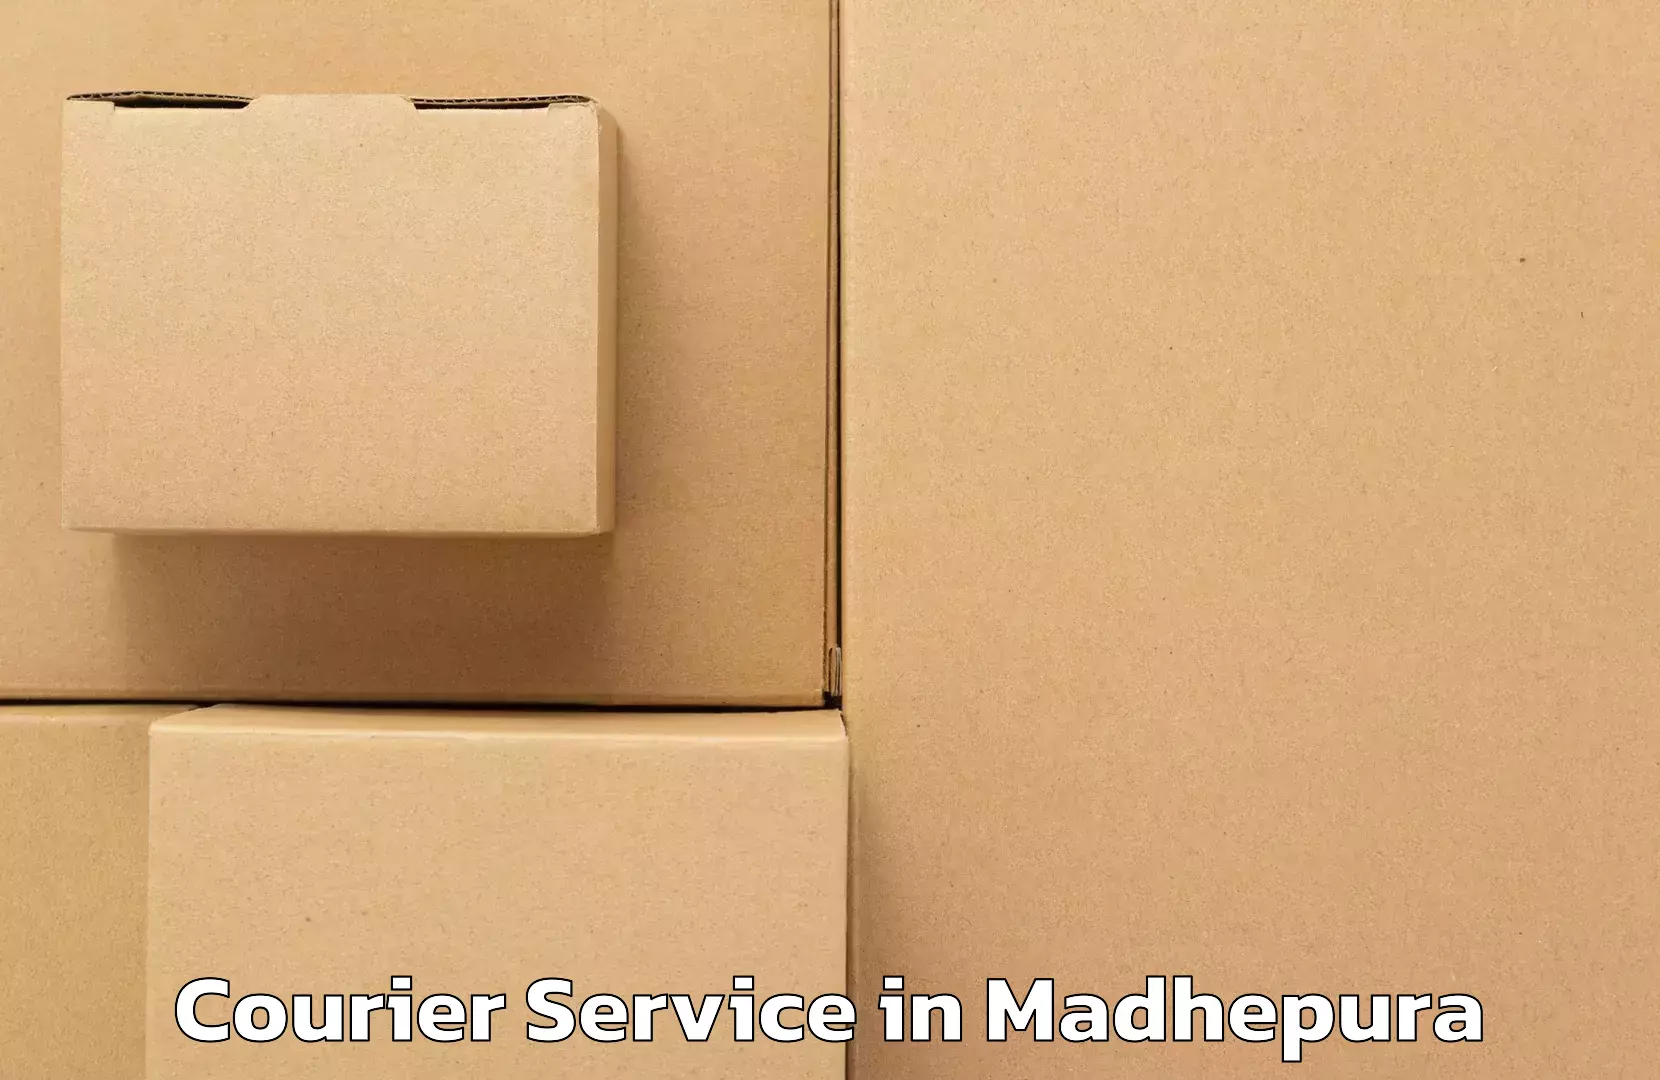 Express package services in Madhepura